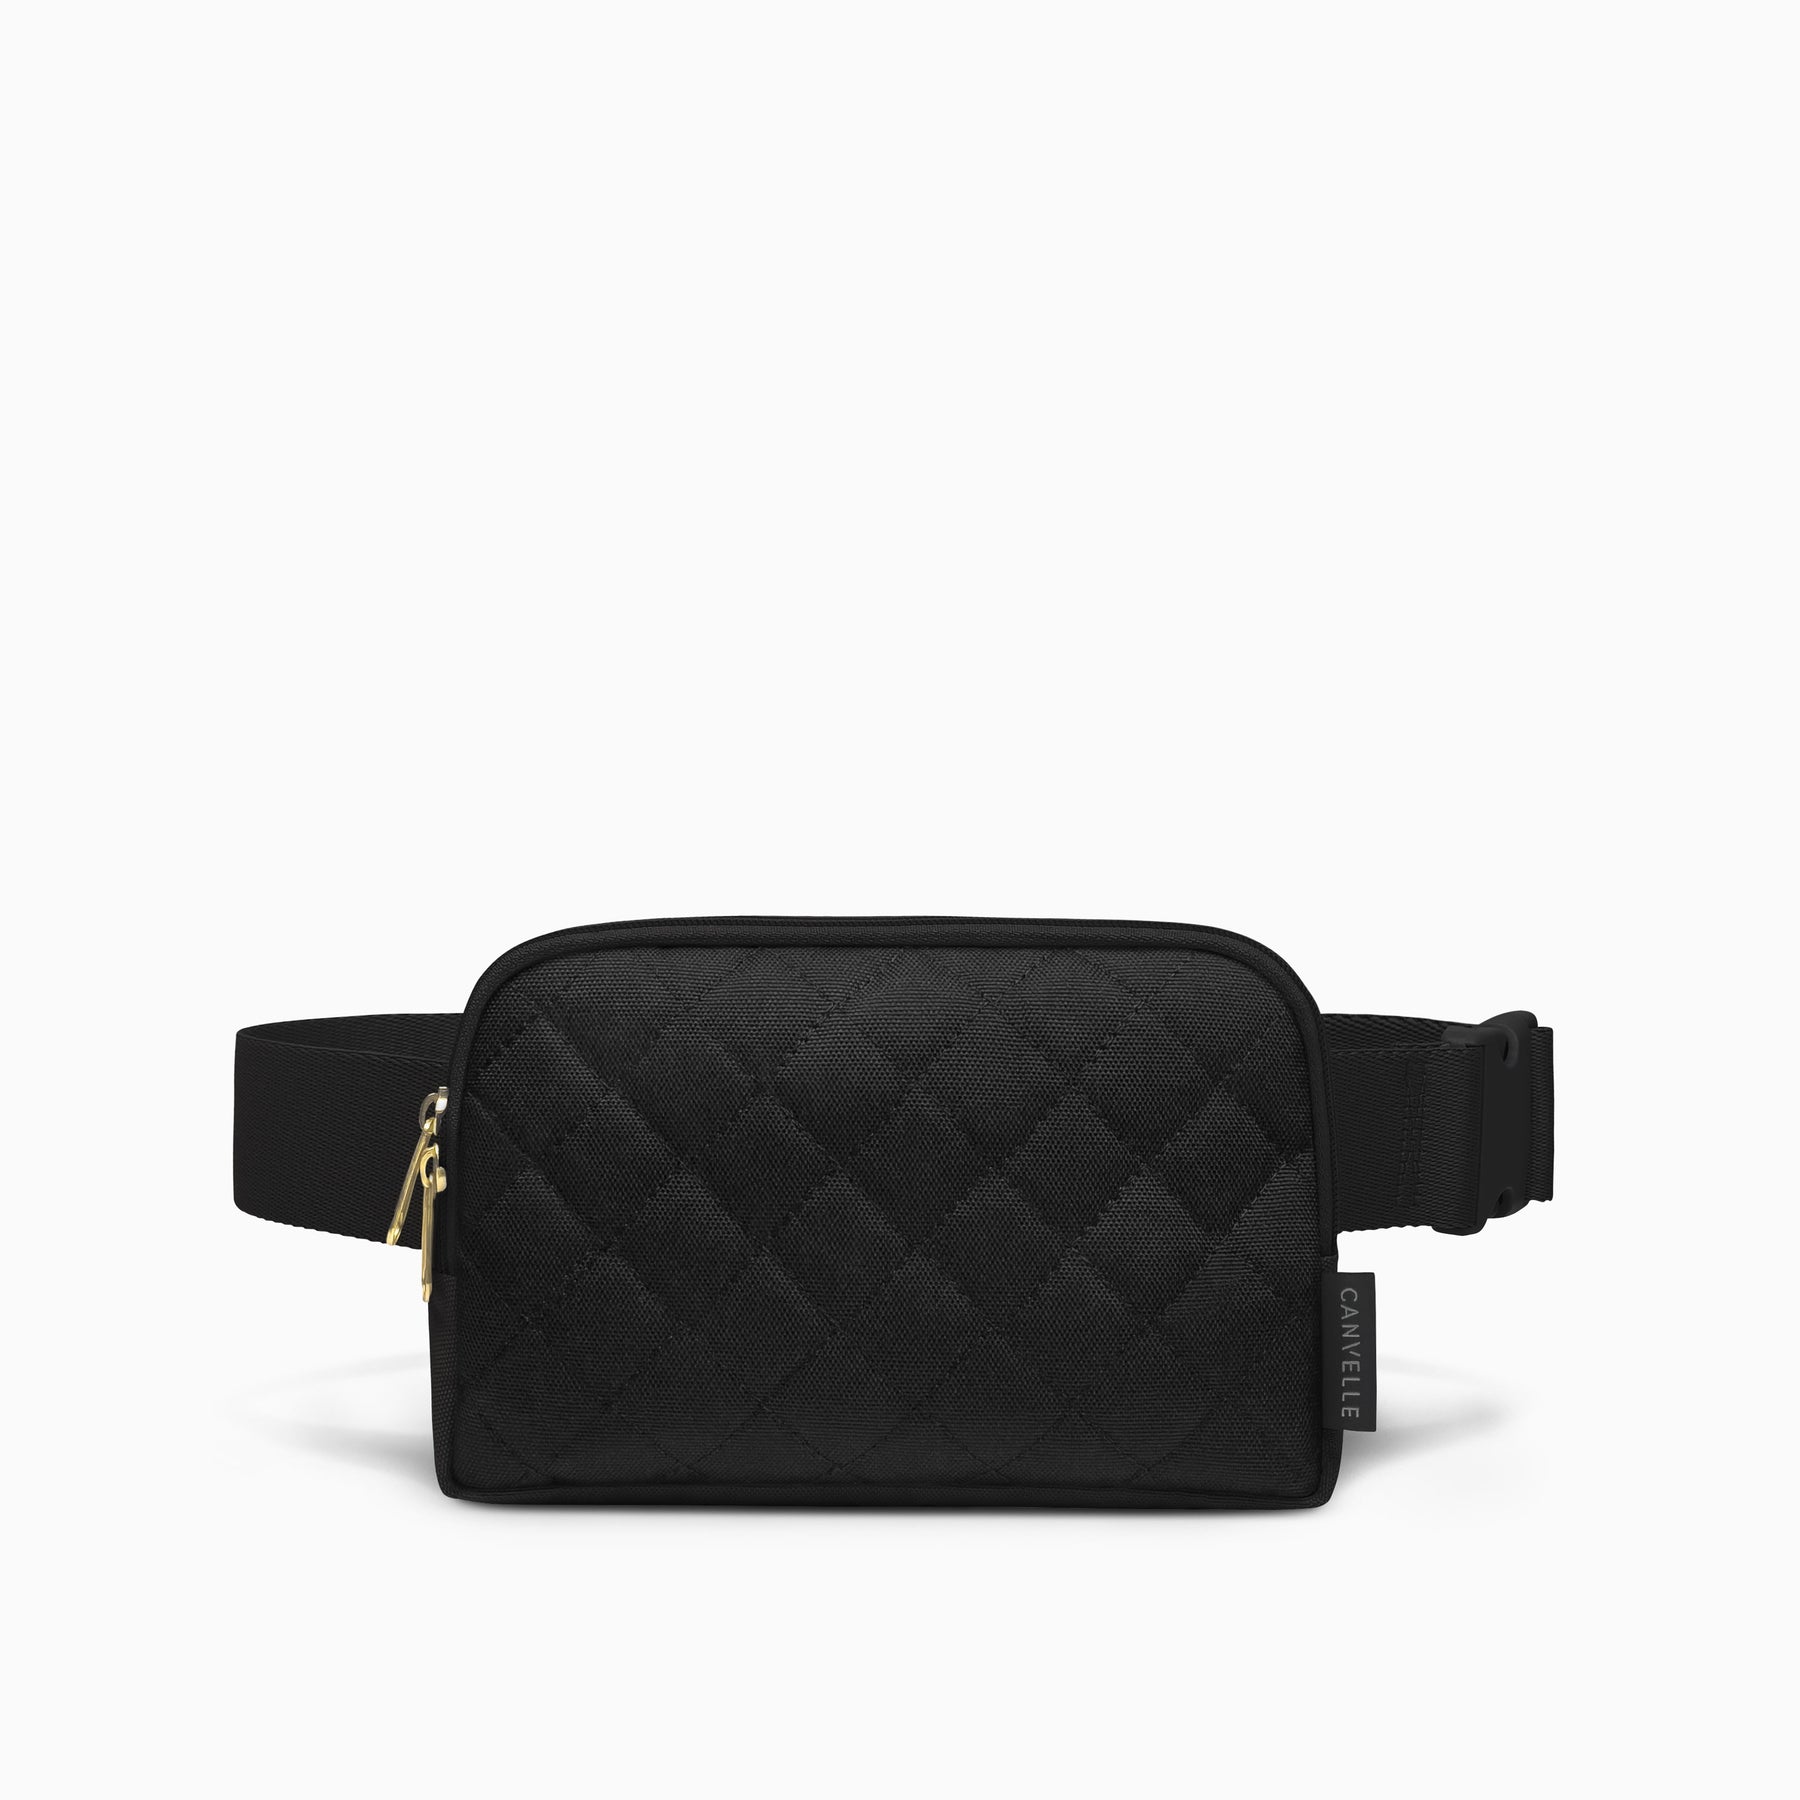 Gucci Fanny Pack Review for 2023 - Is Trending Bag Worth It?